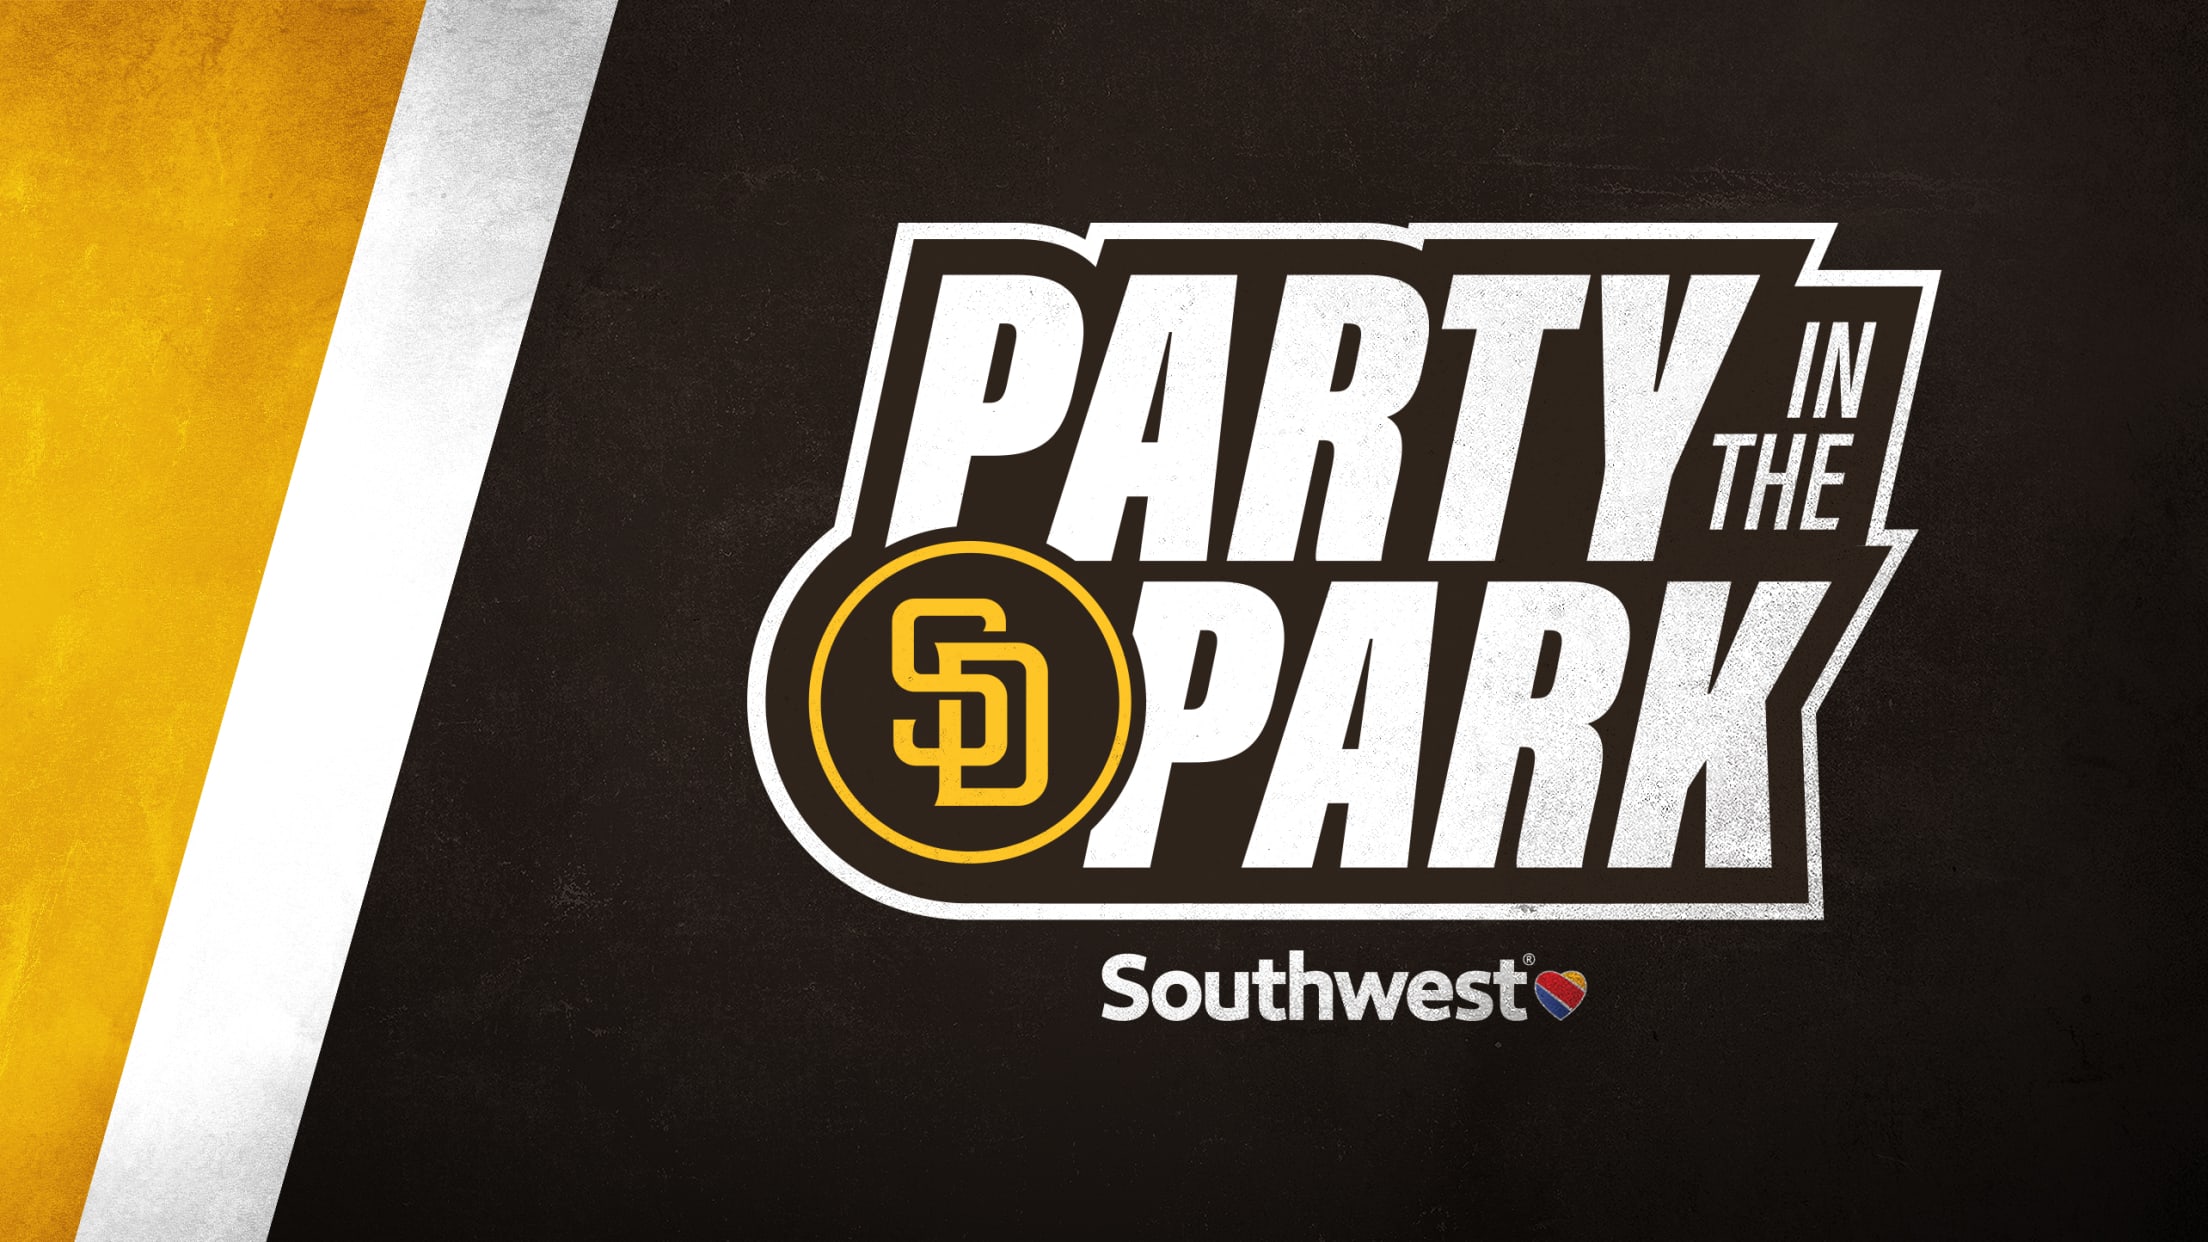 Padres switch Tatis bobblehead giveaway to Soto shirt night - The